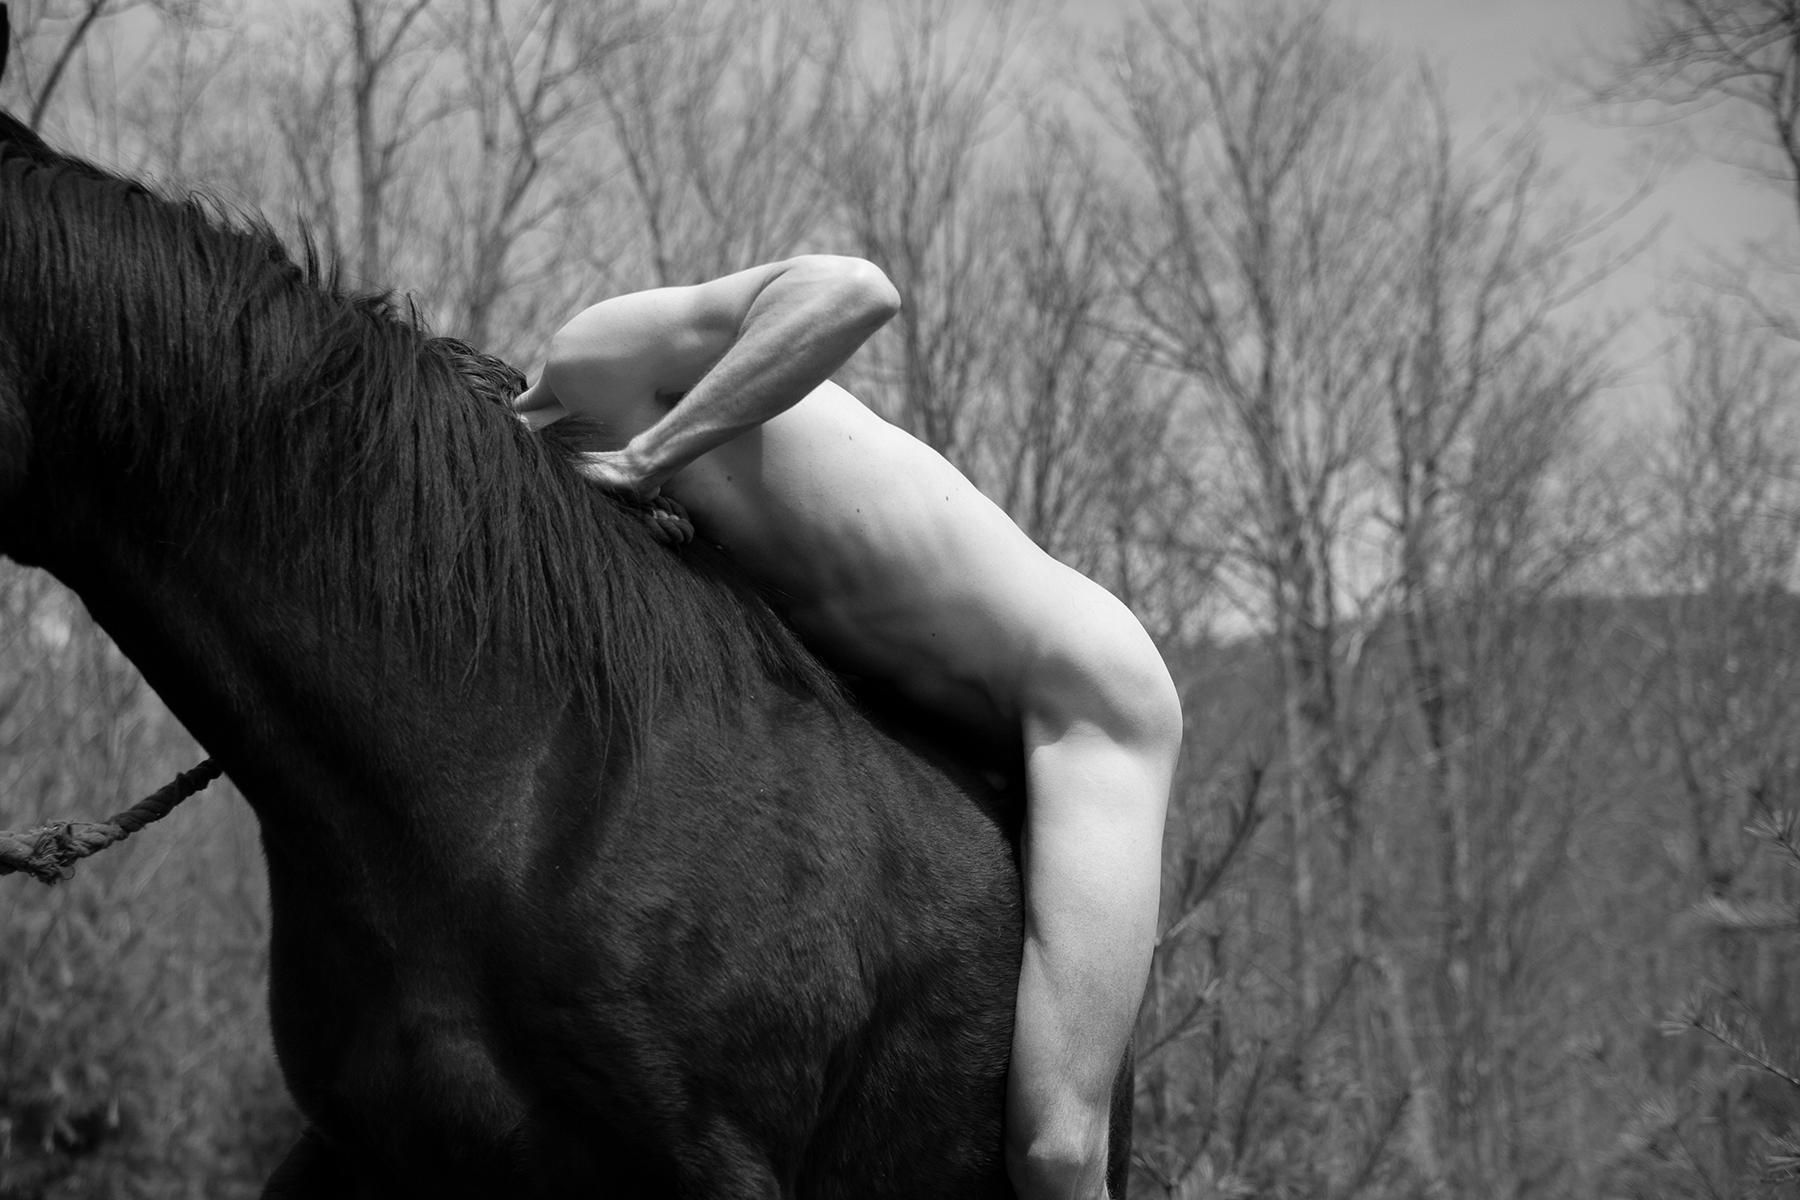 Ricky Cohete Figurative Photograph - Untitled. From The series Horse and Dancer. Male Nude B & W photograph